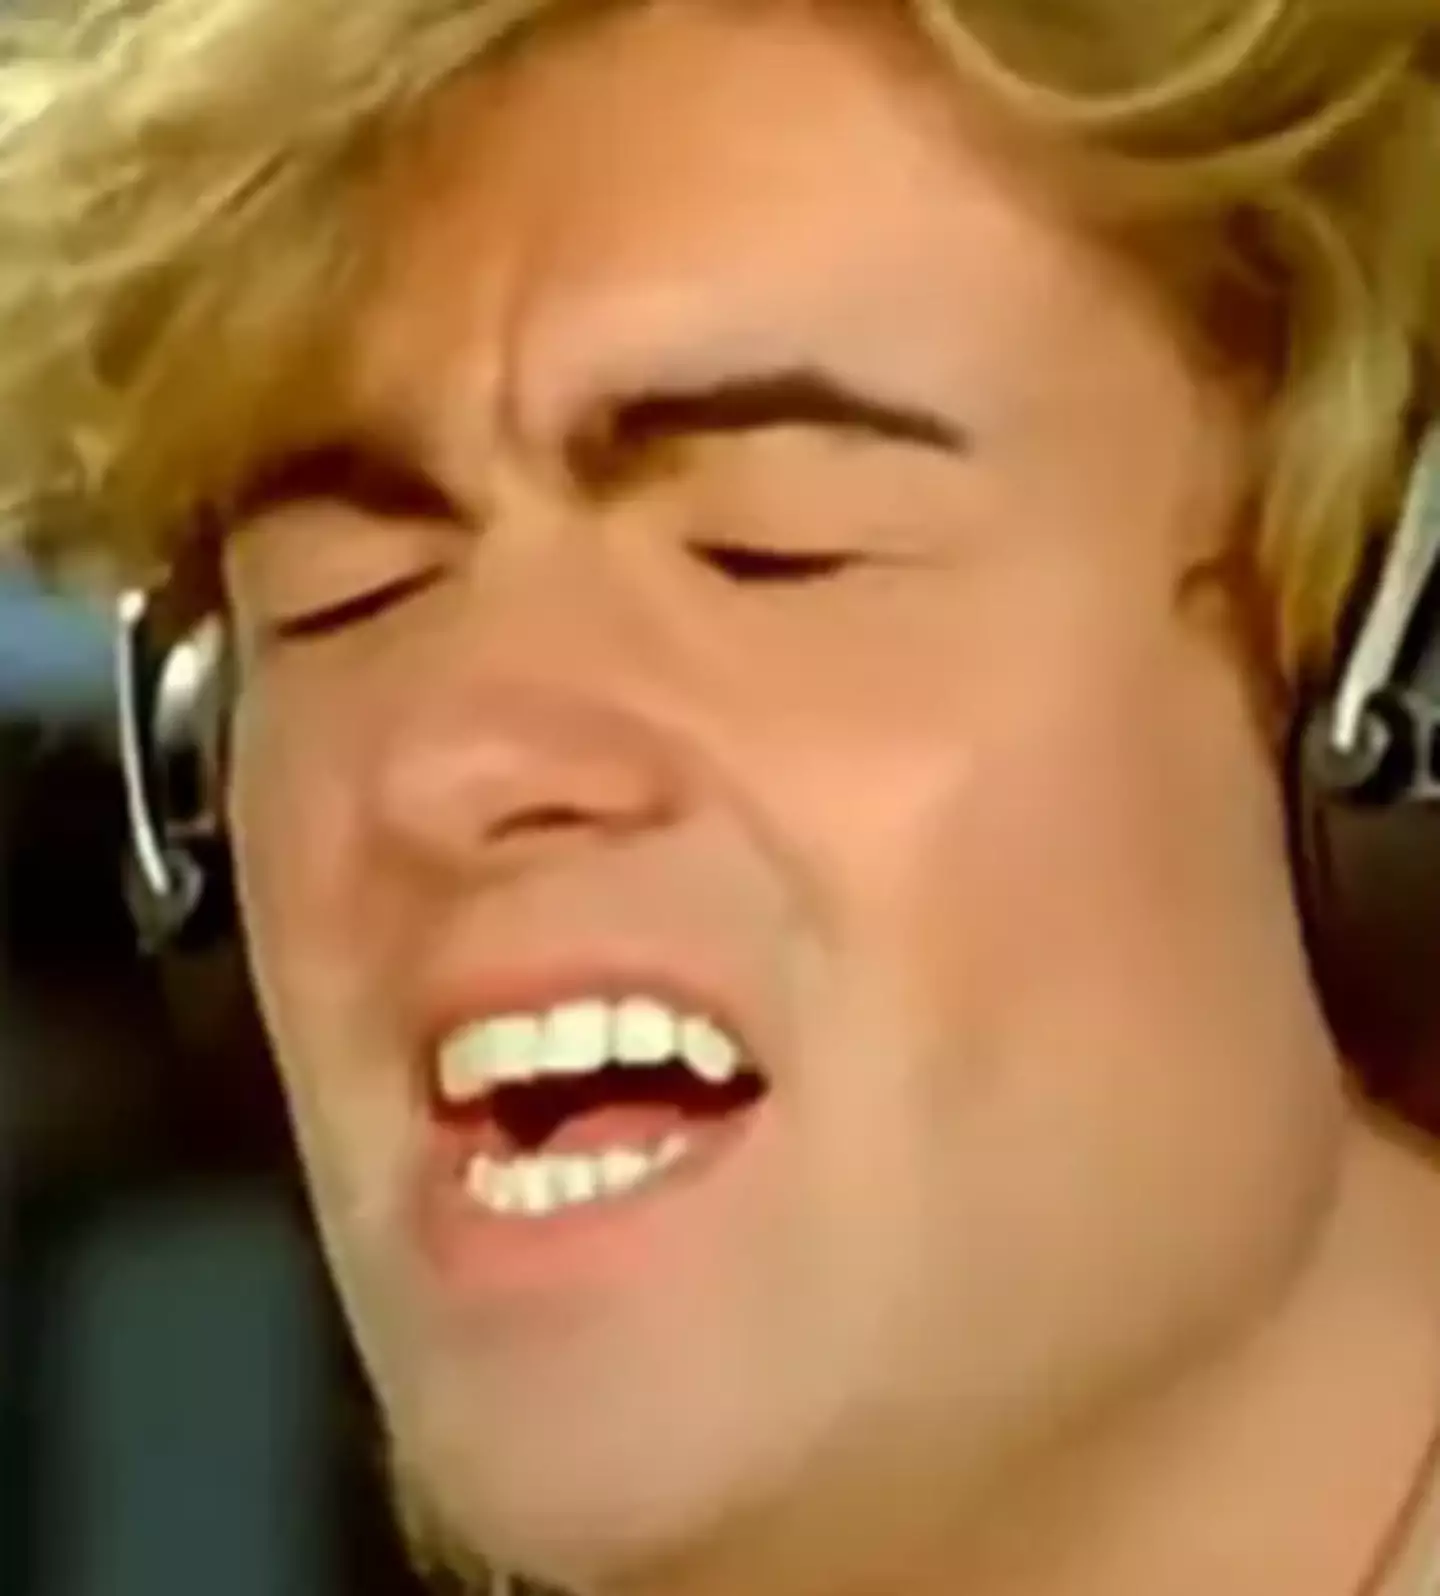 George Michael fronted BandAid's track.